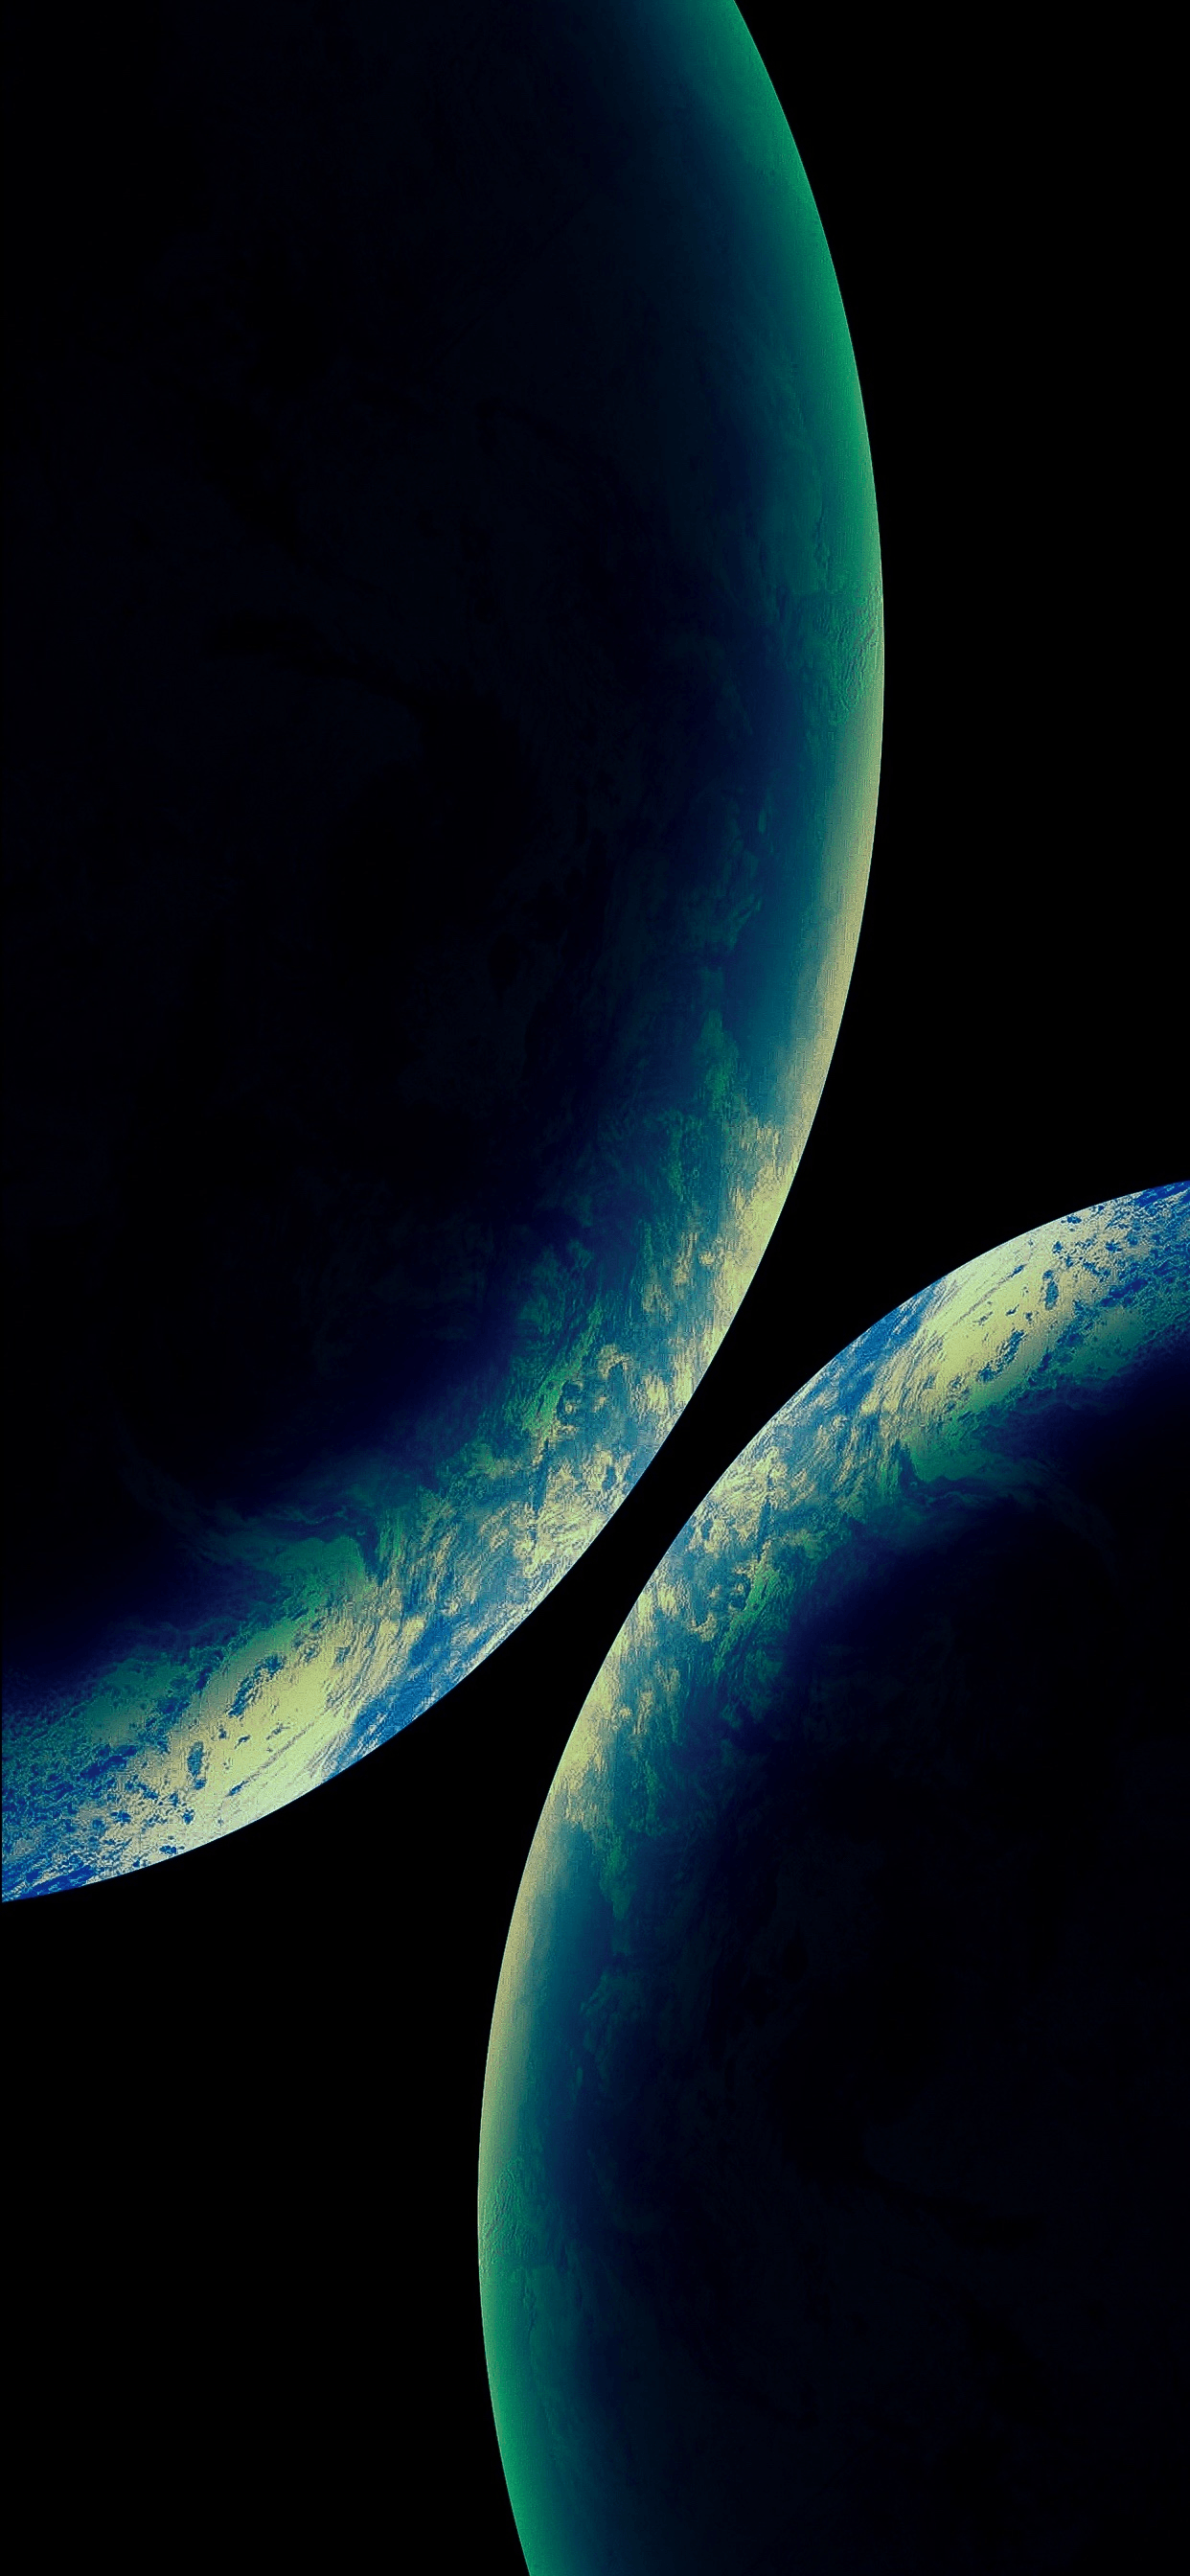 Wallpaper of the week: fantasy planets